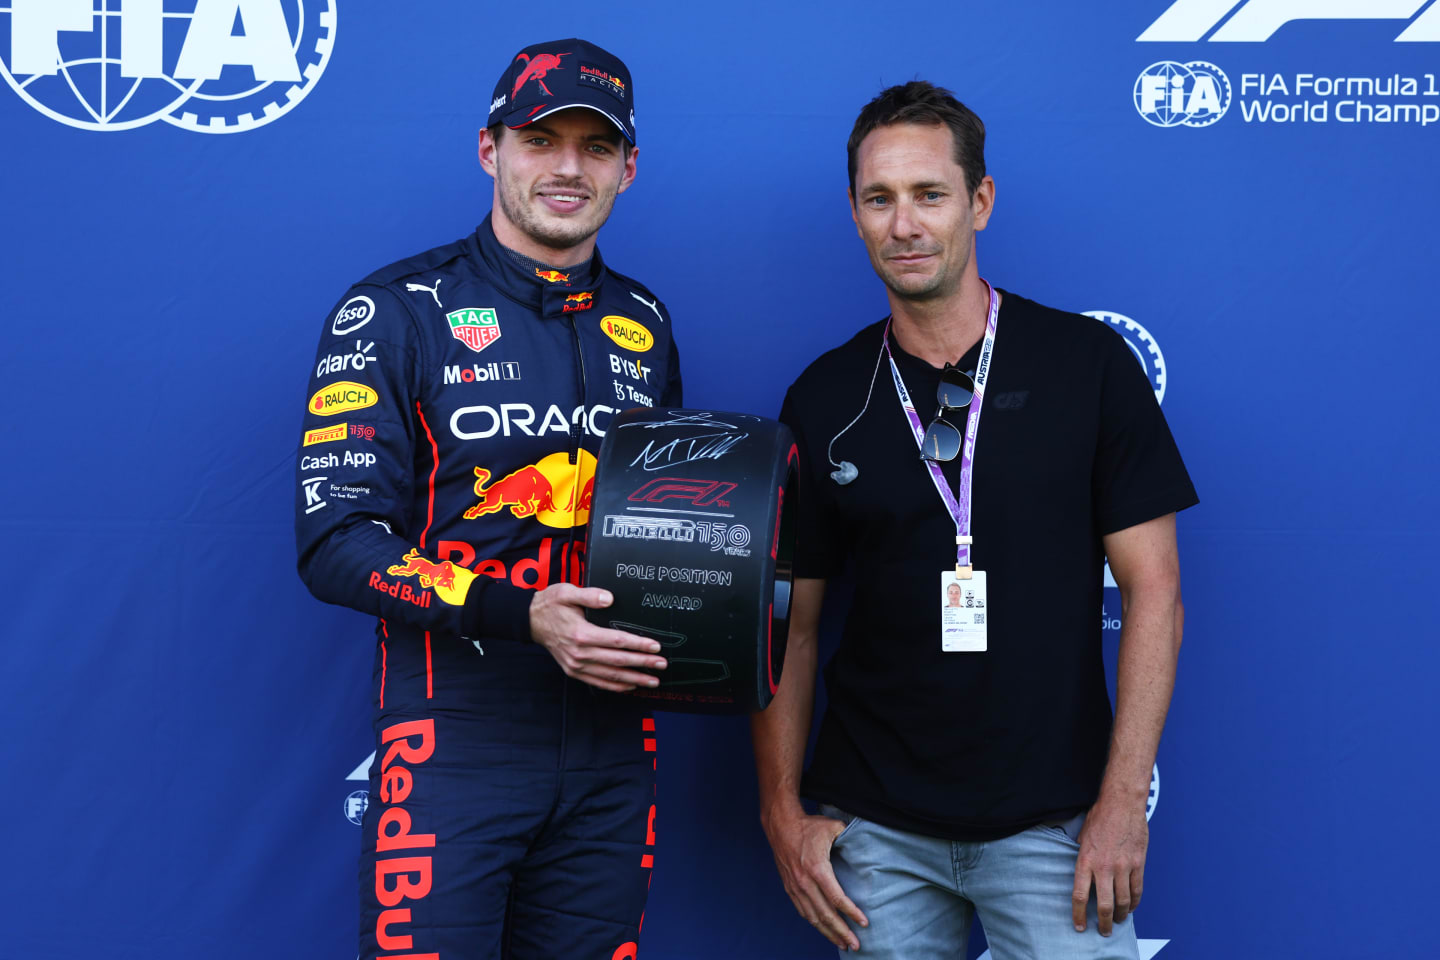 SPIELBERG, AUSTRIA - JULY 08: Pole position qualifier Max Verstappen of the Netherlands and Oracle